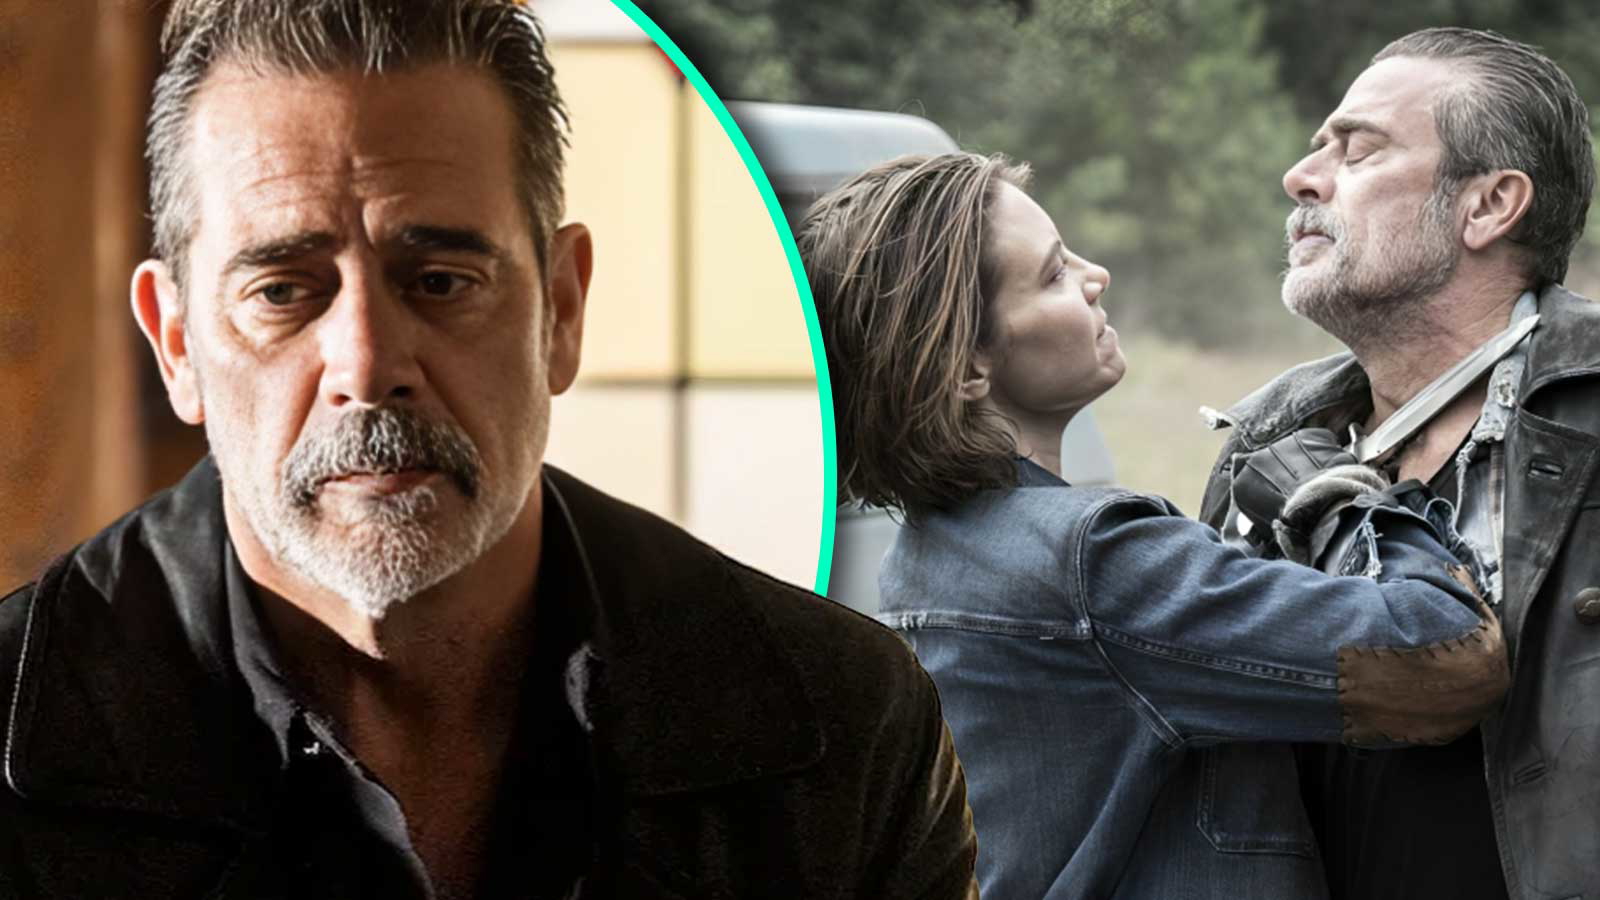 “There’s like gravitational pull…”: ‘The Walking Dead: Dead City’ Showrunner’s Comments on Fans Shipping Maggie and Negan Will Make the OG Fans Revolt